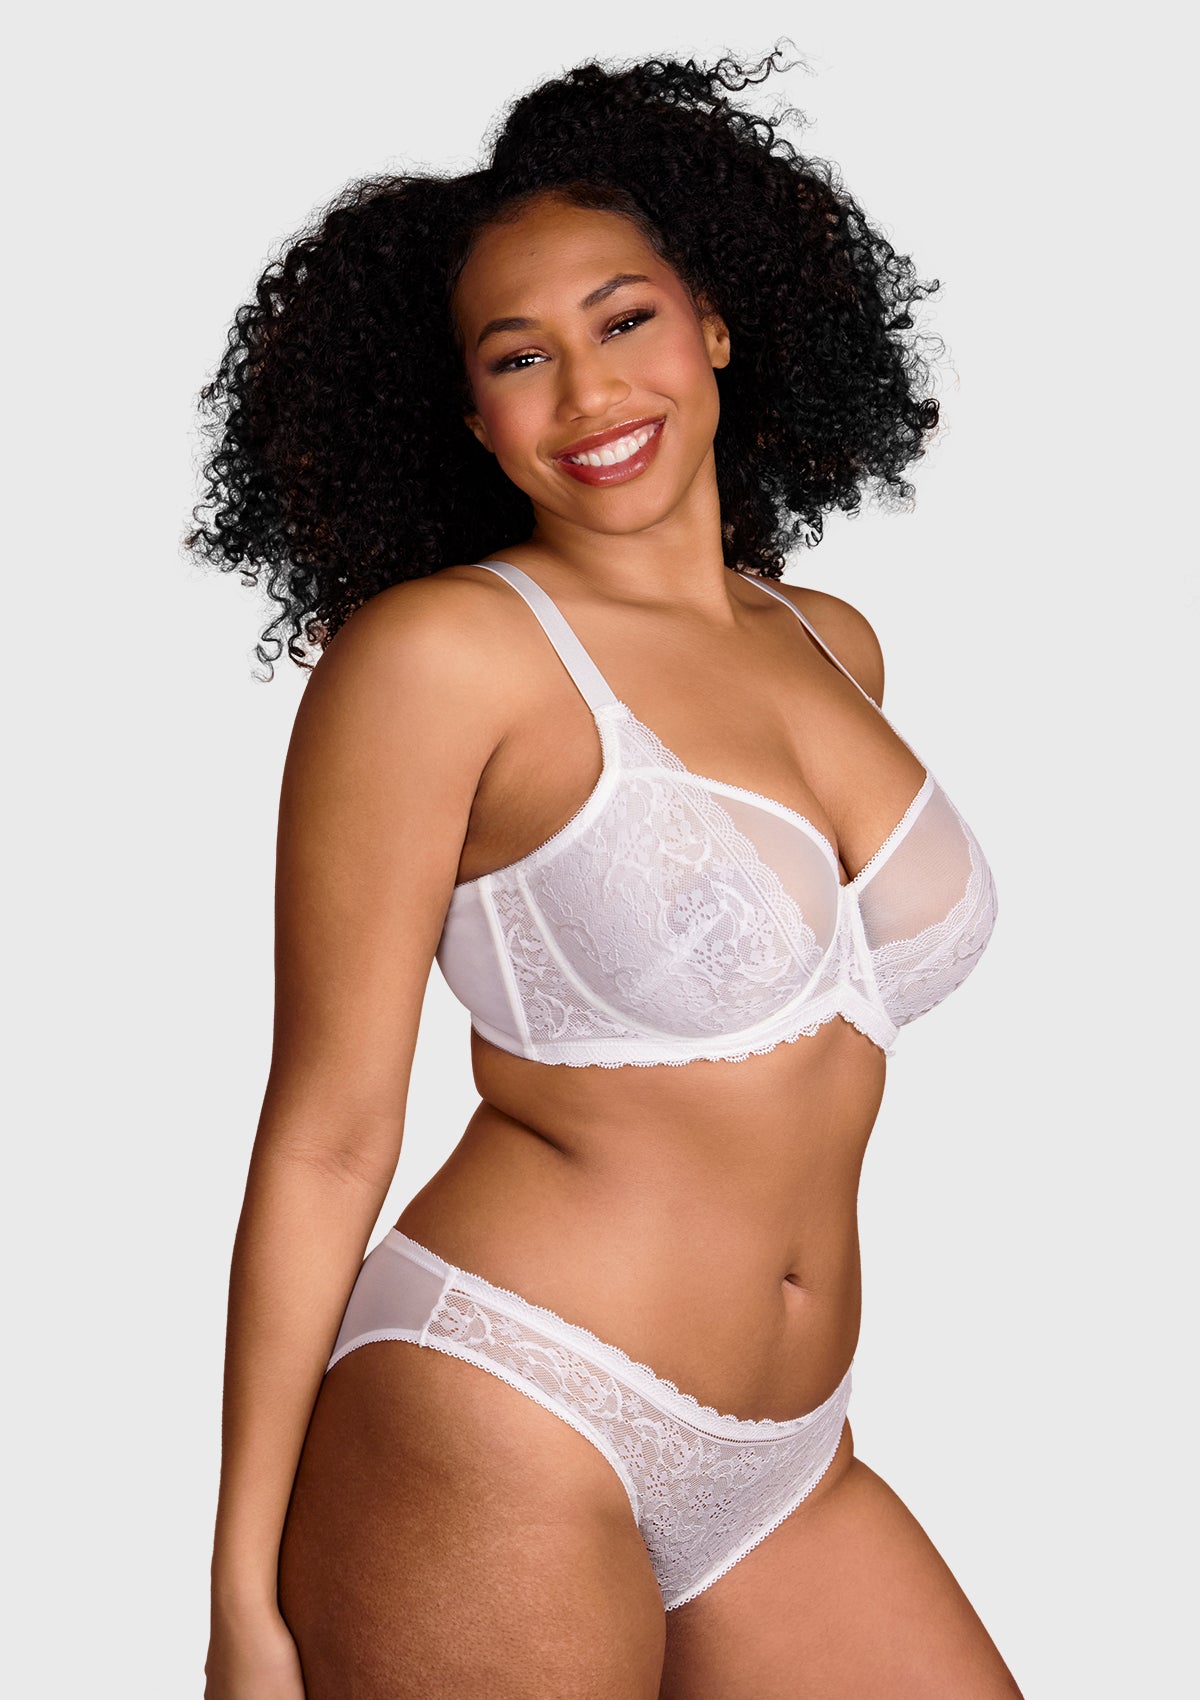 HSIA Anemone Big Bra: Best Bra For Lift And Support, Floral Bra - Light Blue / 36 / DDD/F